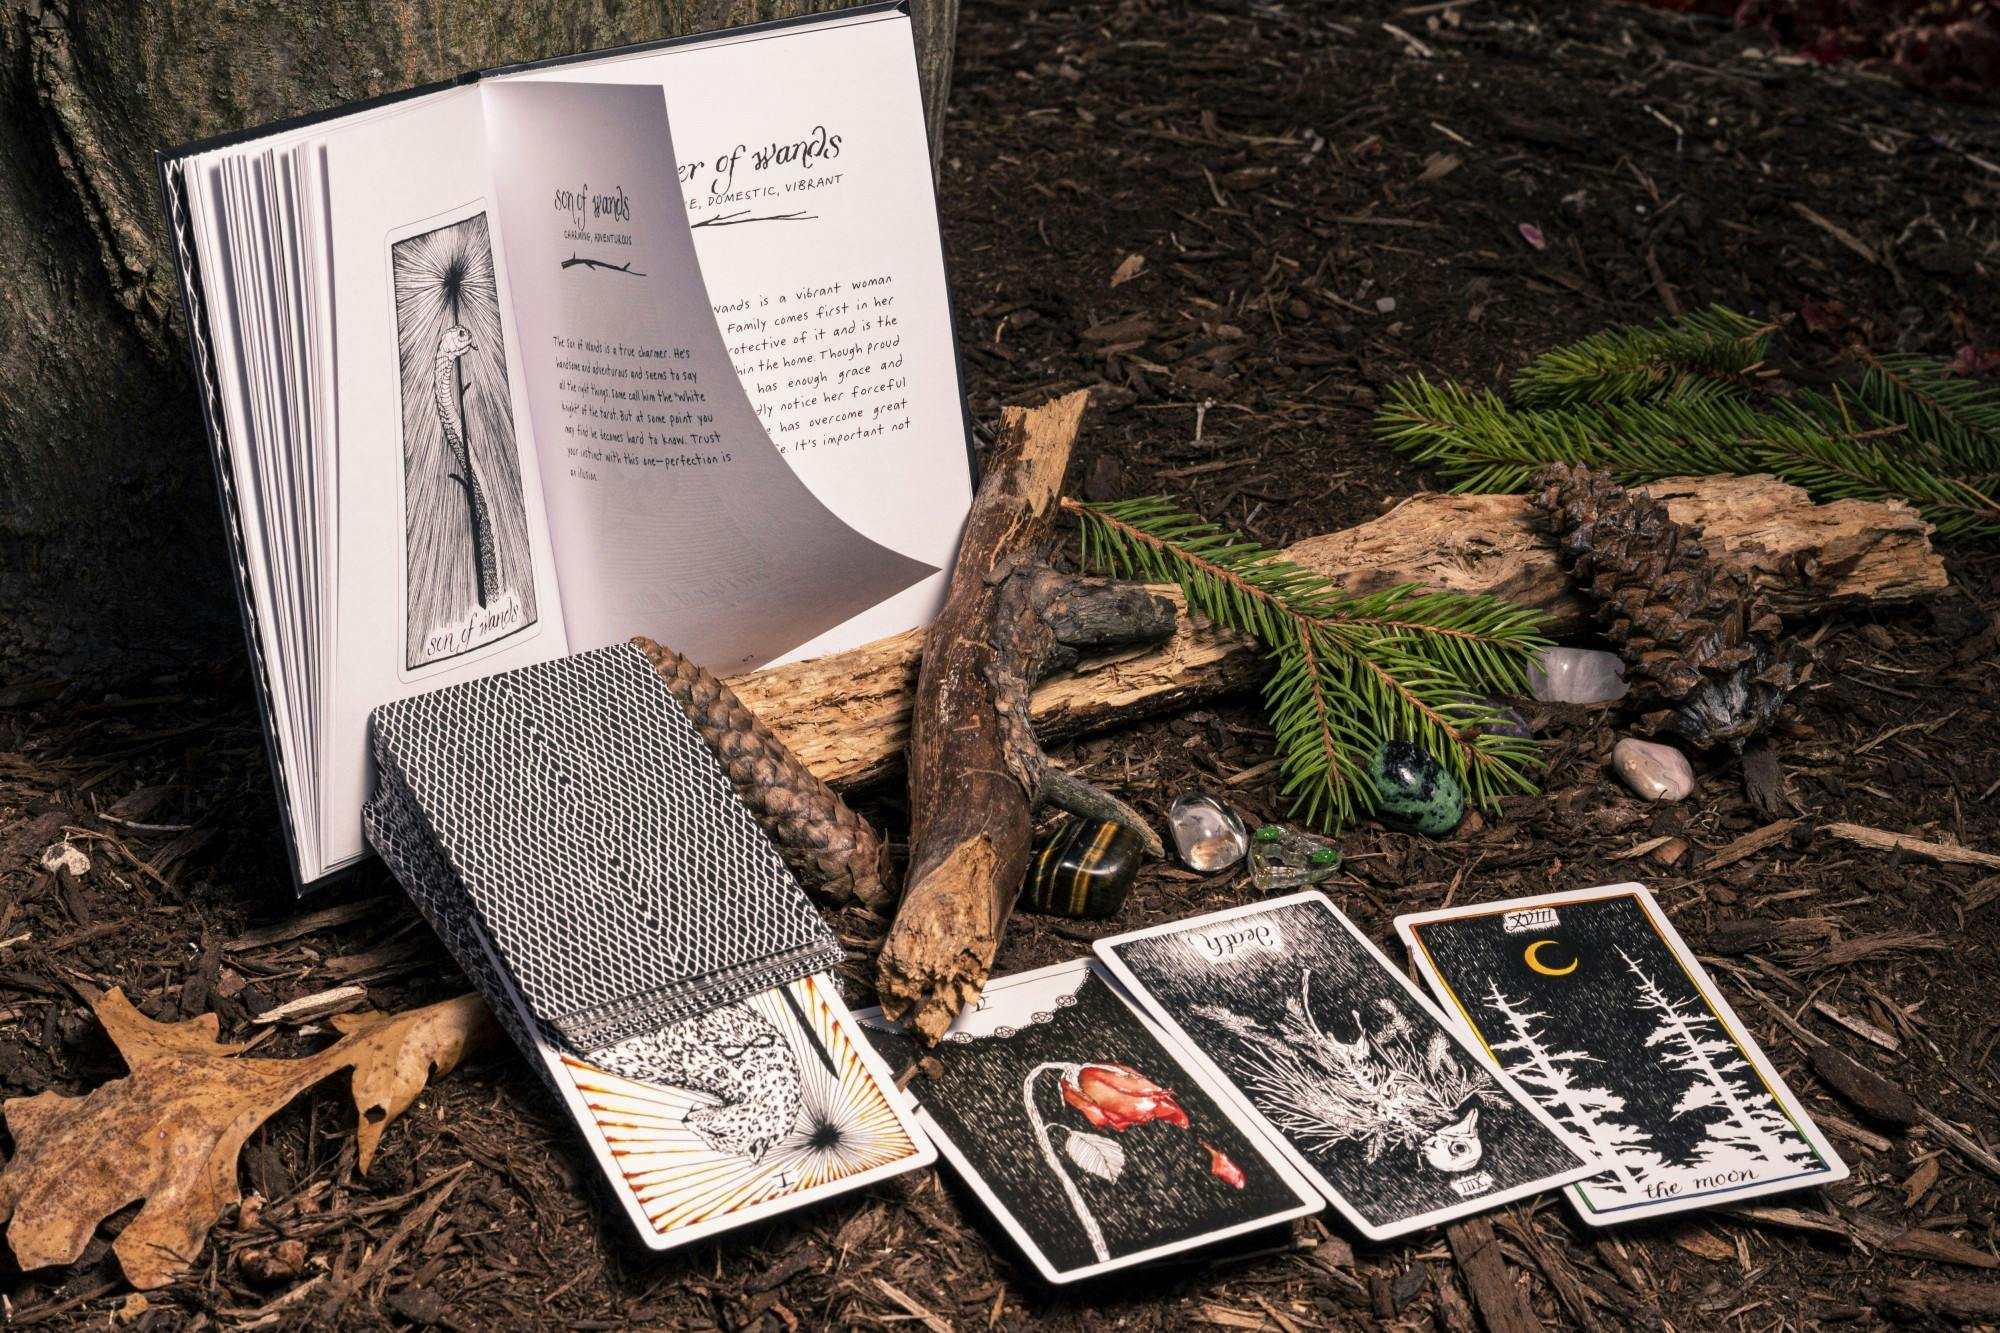 <p>Tarot cards and gemstones photographed with the essence of nature surrounding them. Professor Mark Waddell is bringing back a class called HST 293: Witches, Demons, and the Occult, which will focus on alchemy, astrology and overall history of witchcraft in Europe. </p>